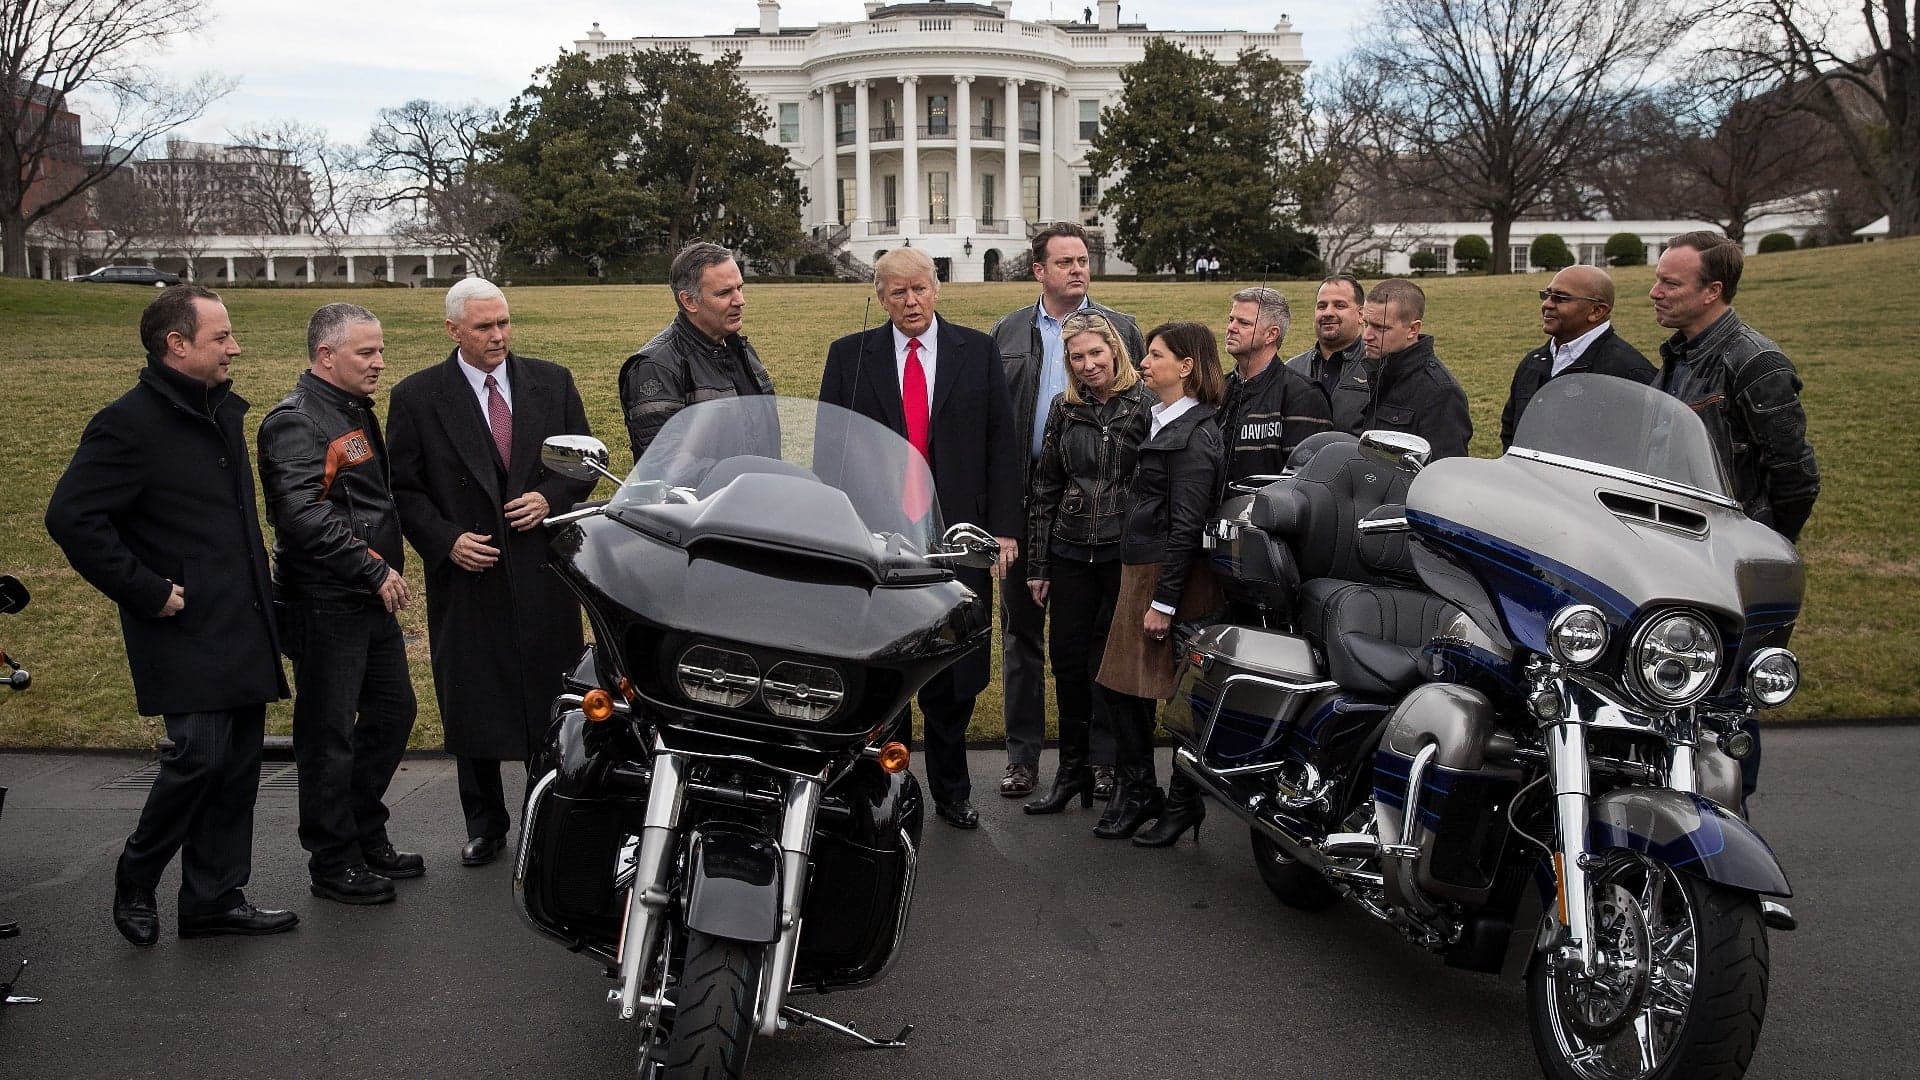 Here’s What’s Really Going On With Harley-Davidson, Trade Tariffs, and Donald Trump